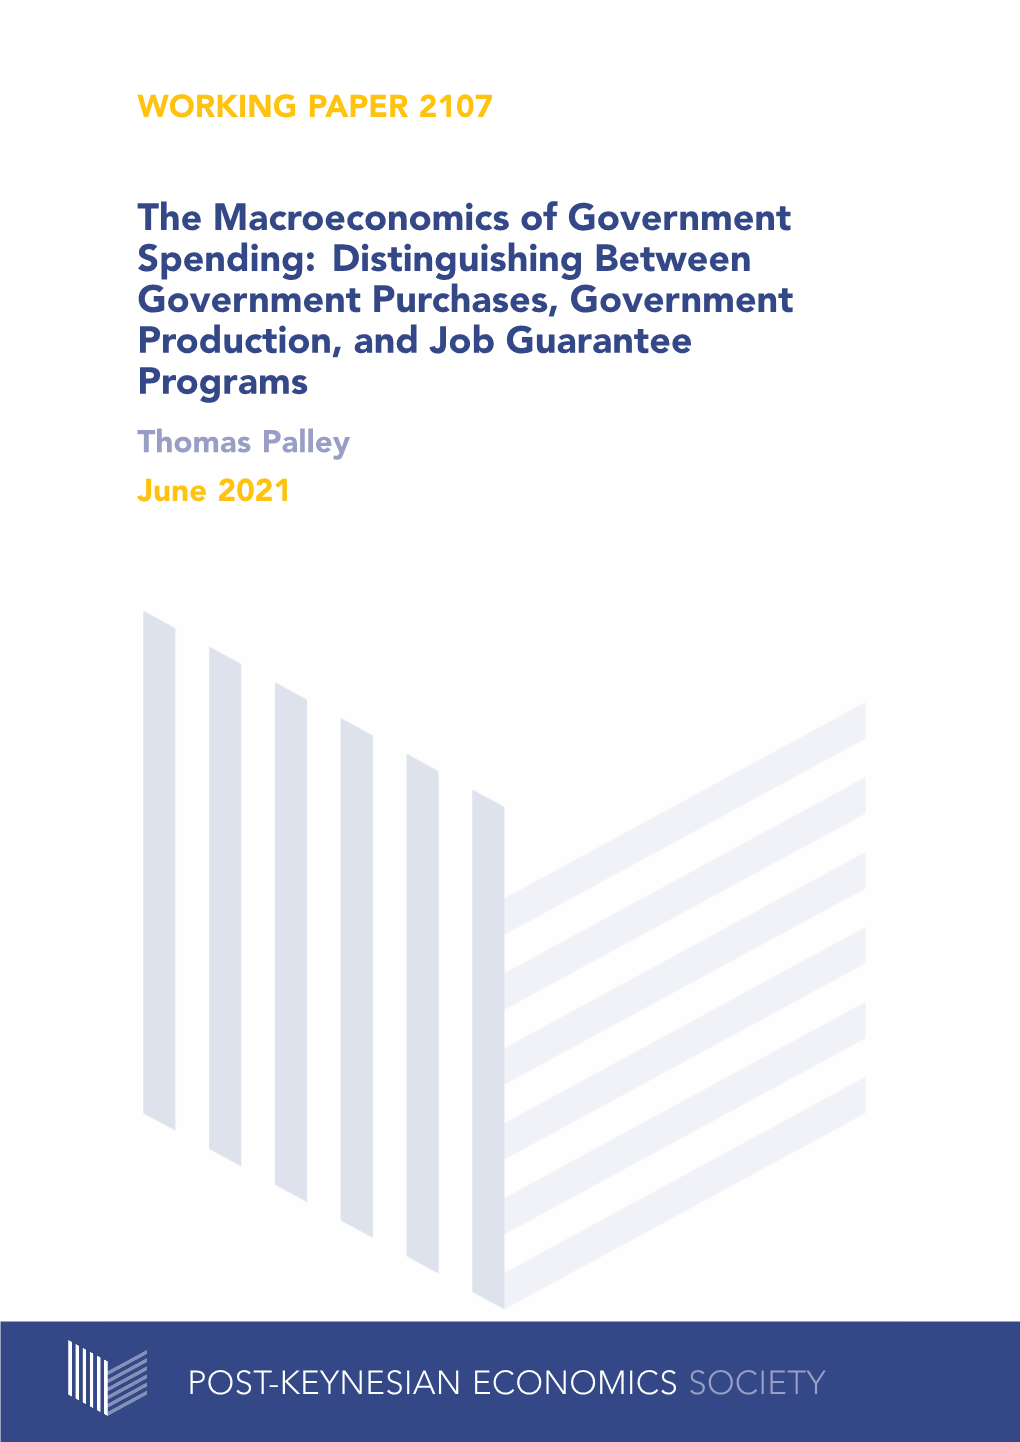 The Macroeconomics of Government Spending: Distinguishing Between Government Purchases, Government Production, and Job Guarantee Programs Thomas Palley June 2021